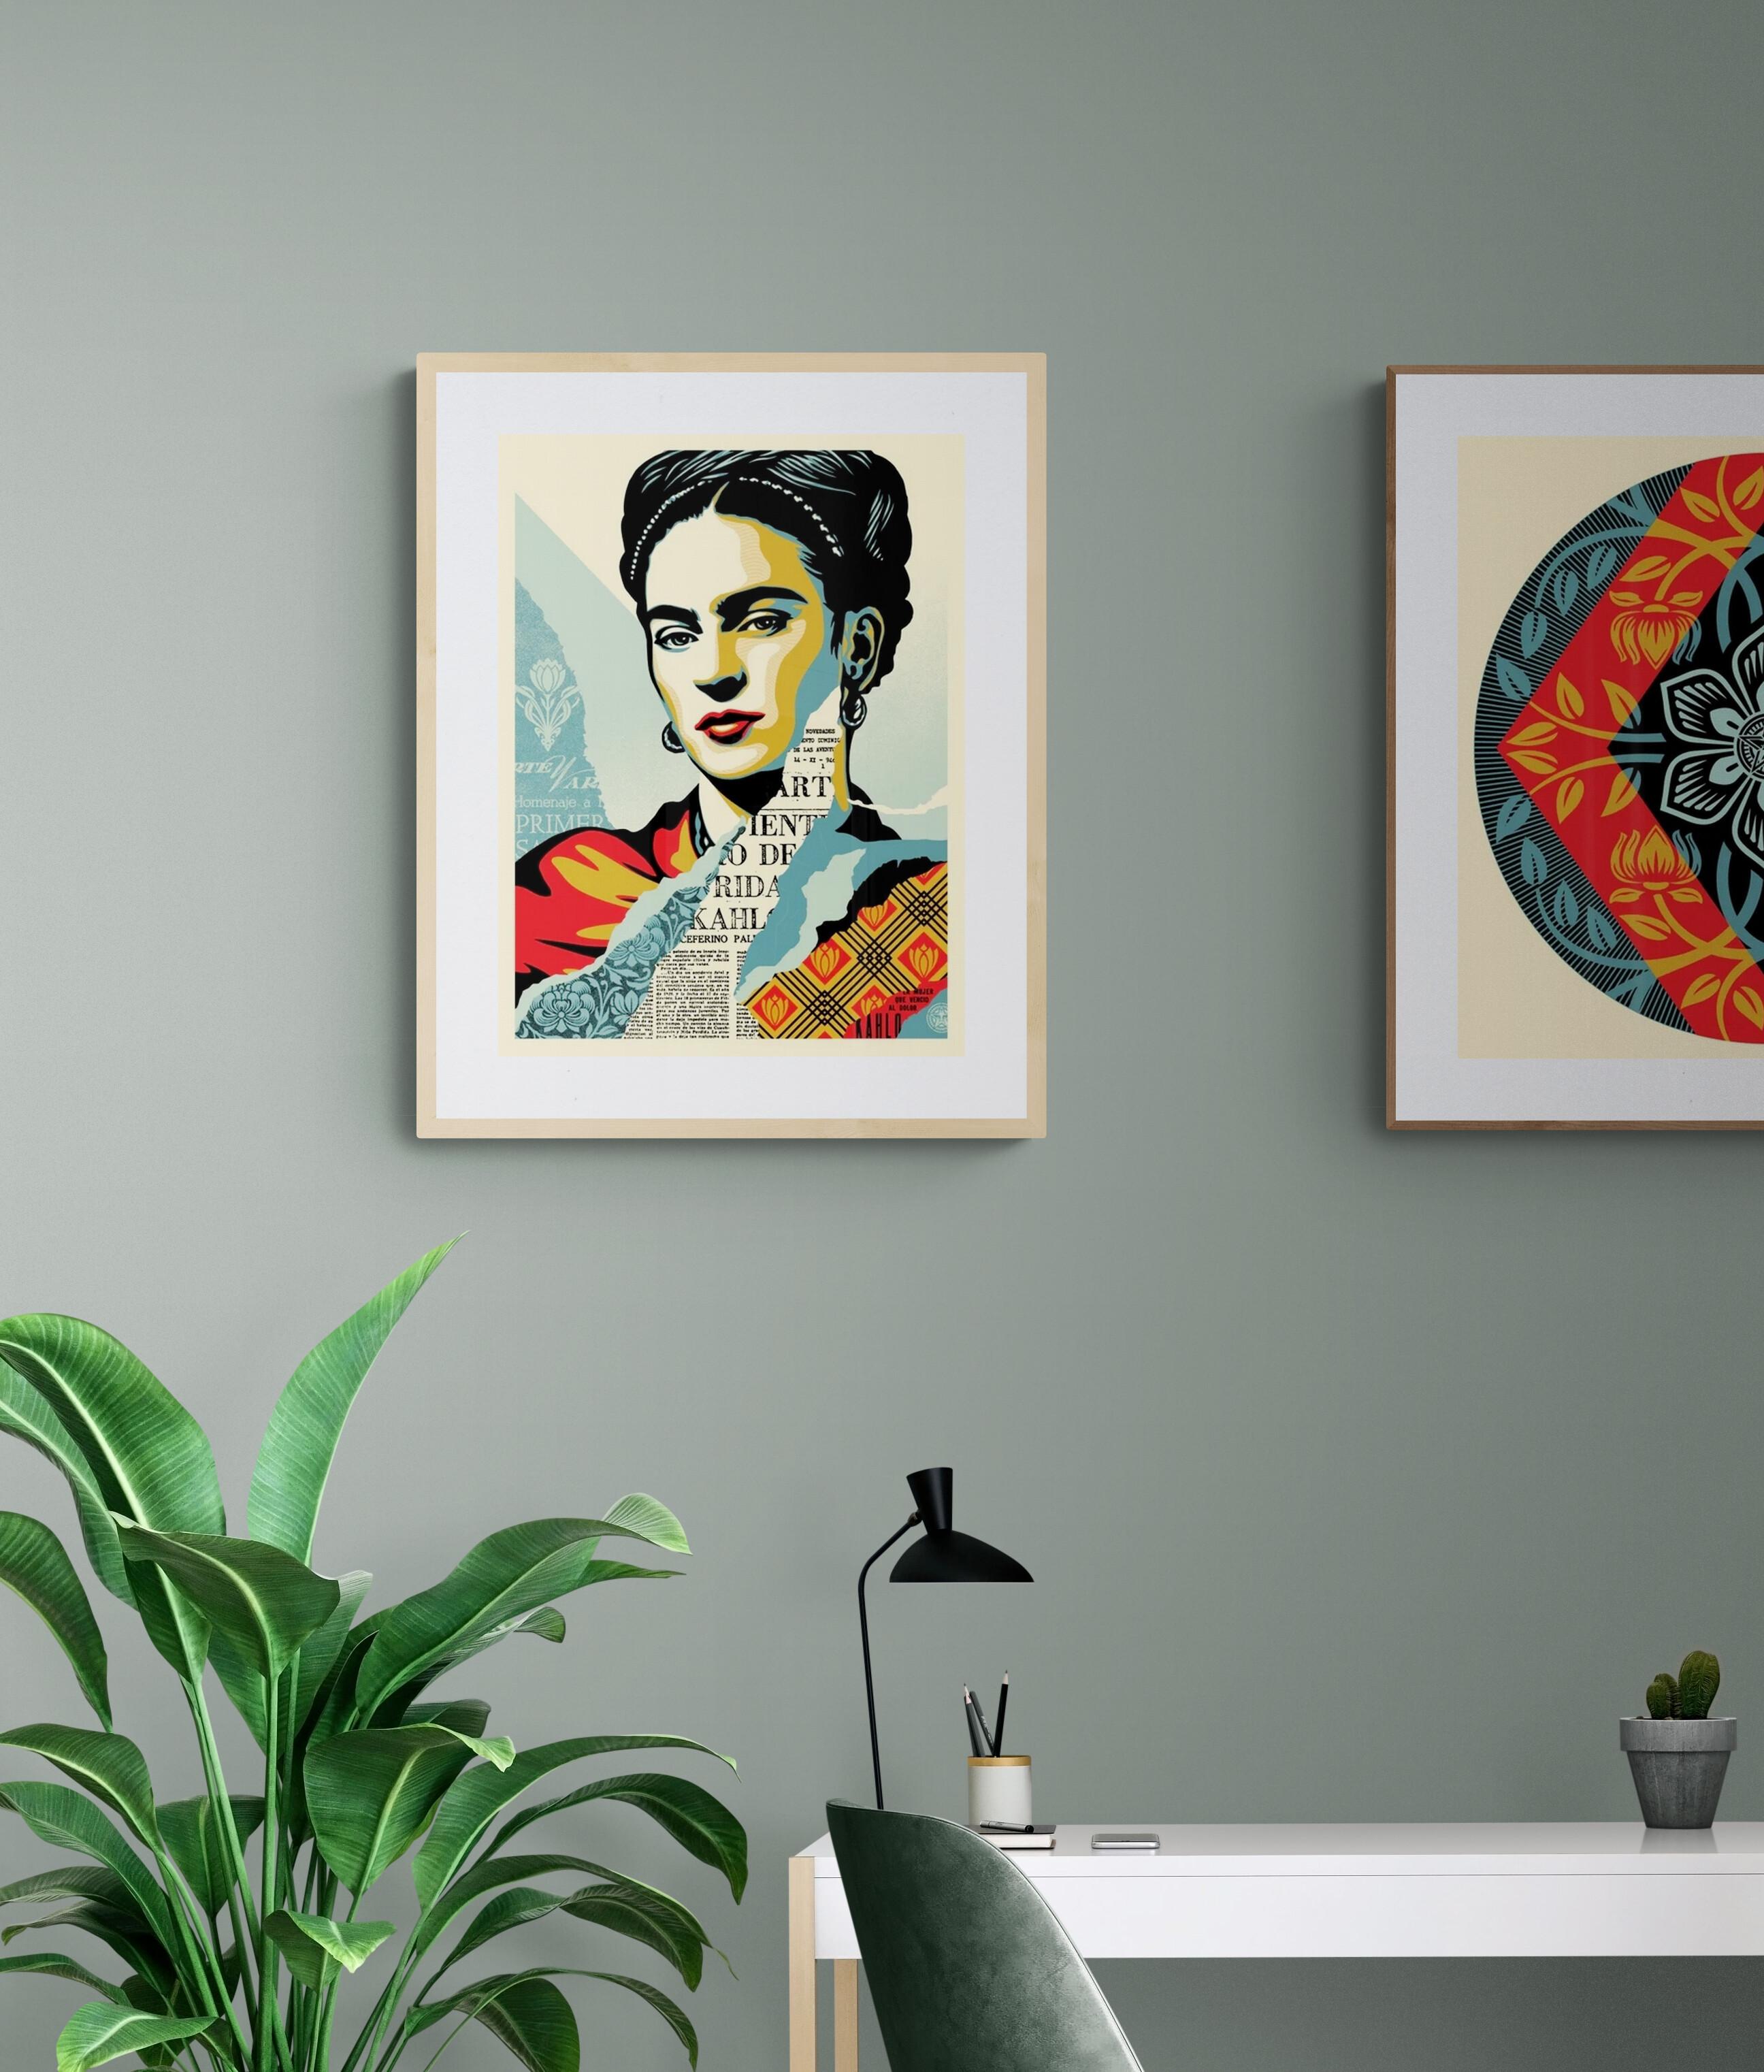 The Woman Who Defeated Pain (Frida Kahlo) (Iconic, Feminist, Trailblazer) - Print by Shepard Fairey